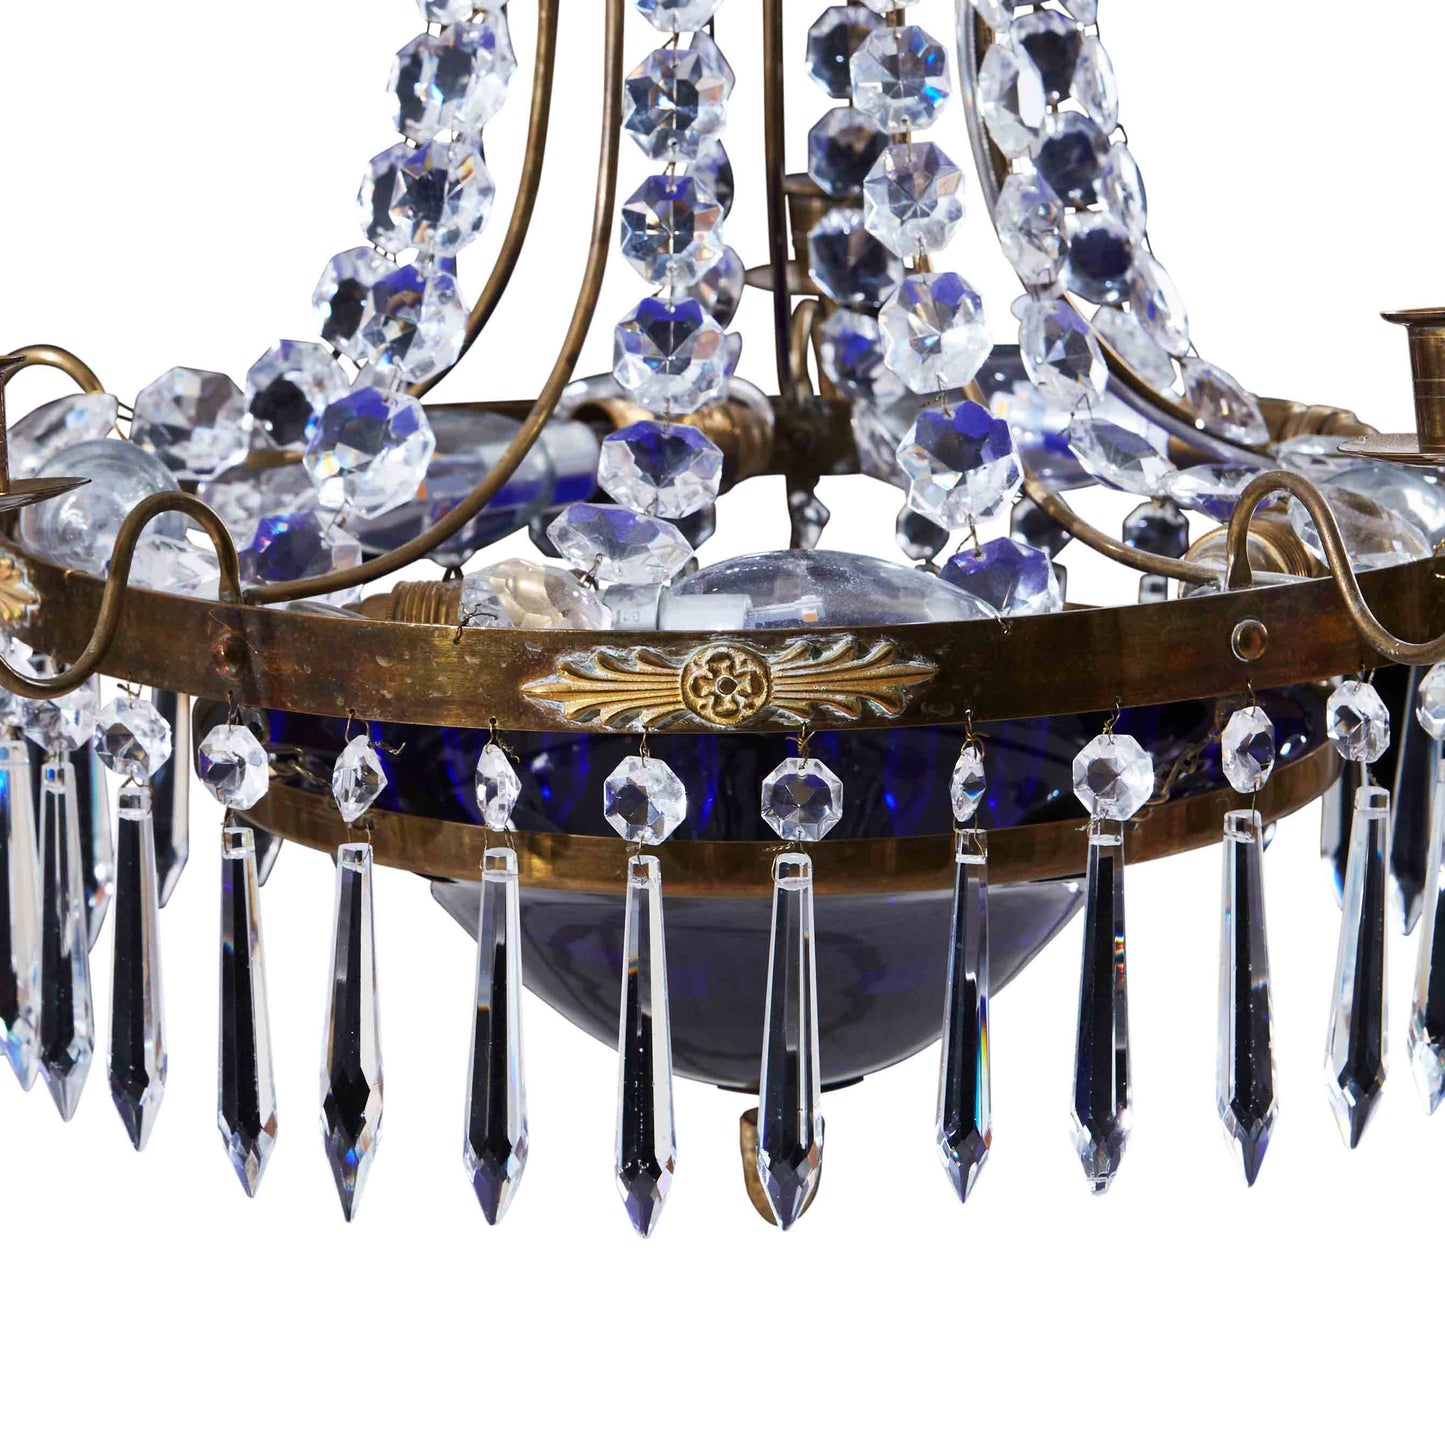 Antique 6 Arm Crystal Empire Chandelier with decorative blue glass bowl 1900's